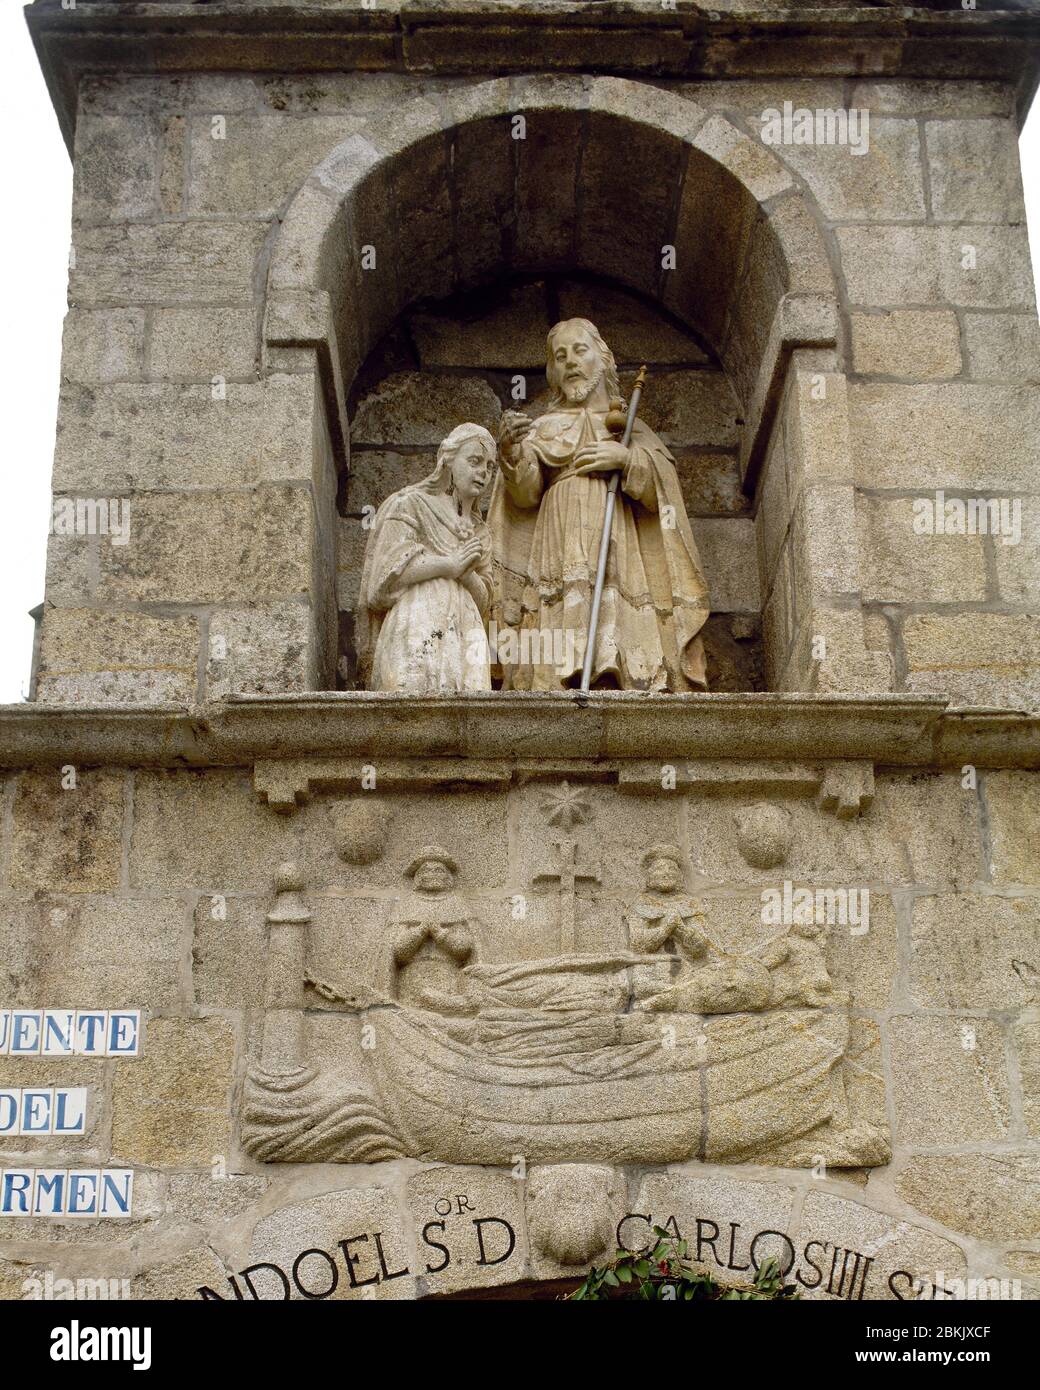 Spain, Galicia, La Coruña province, Padron. Carmen Fountain. In the upper body, sculptural group depicting the baptism of Queen Lupa by the Apostle James. In the central body (at the bottom of the image), translation of James the Great by his disciples to these lands. The fountain was built by Pedro de la Barcena in 1577, and rebuilt in the 18th century. Detail. Stock Photo